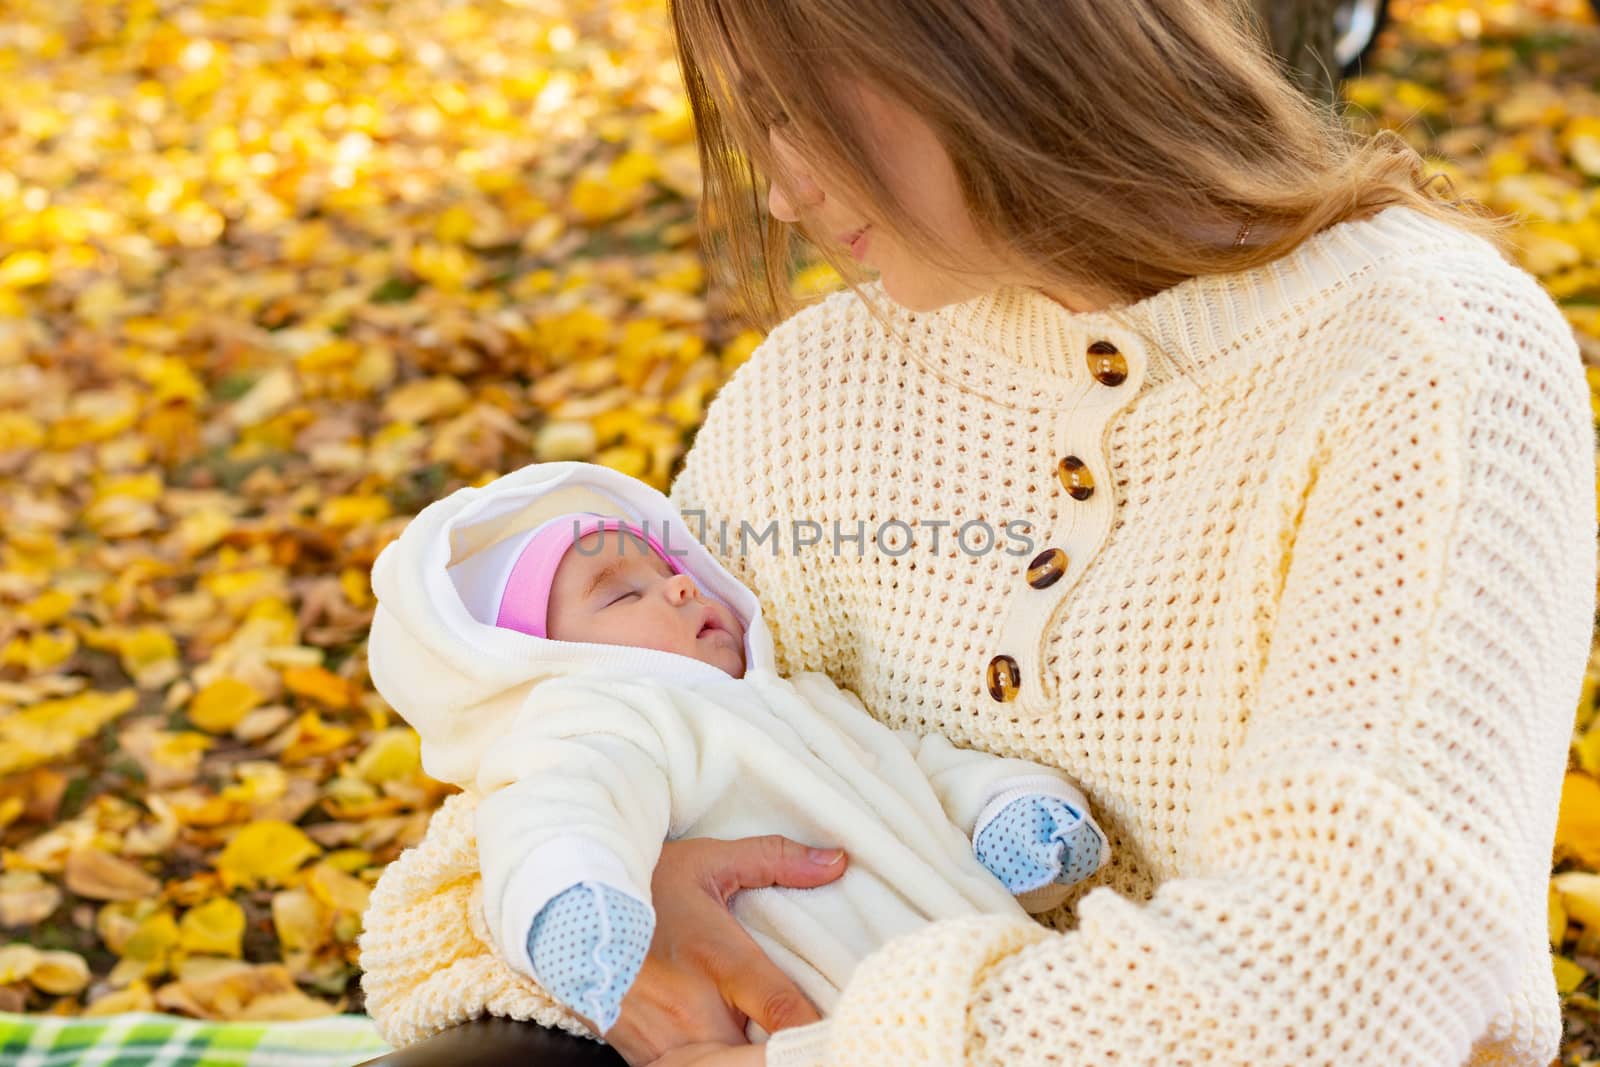 Mom holds baby in her arms on walk in autumn park